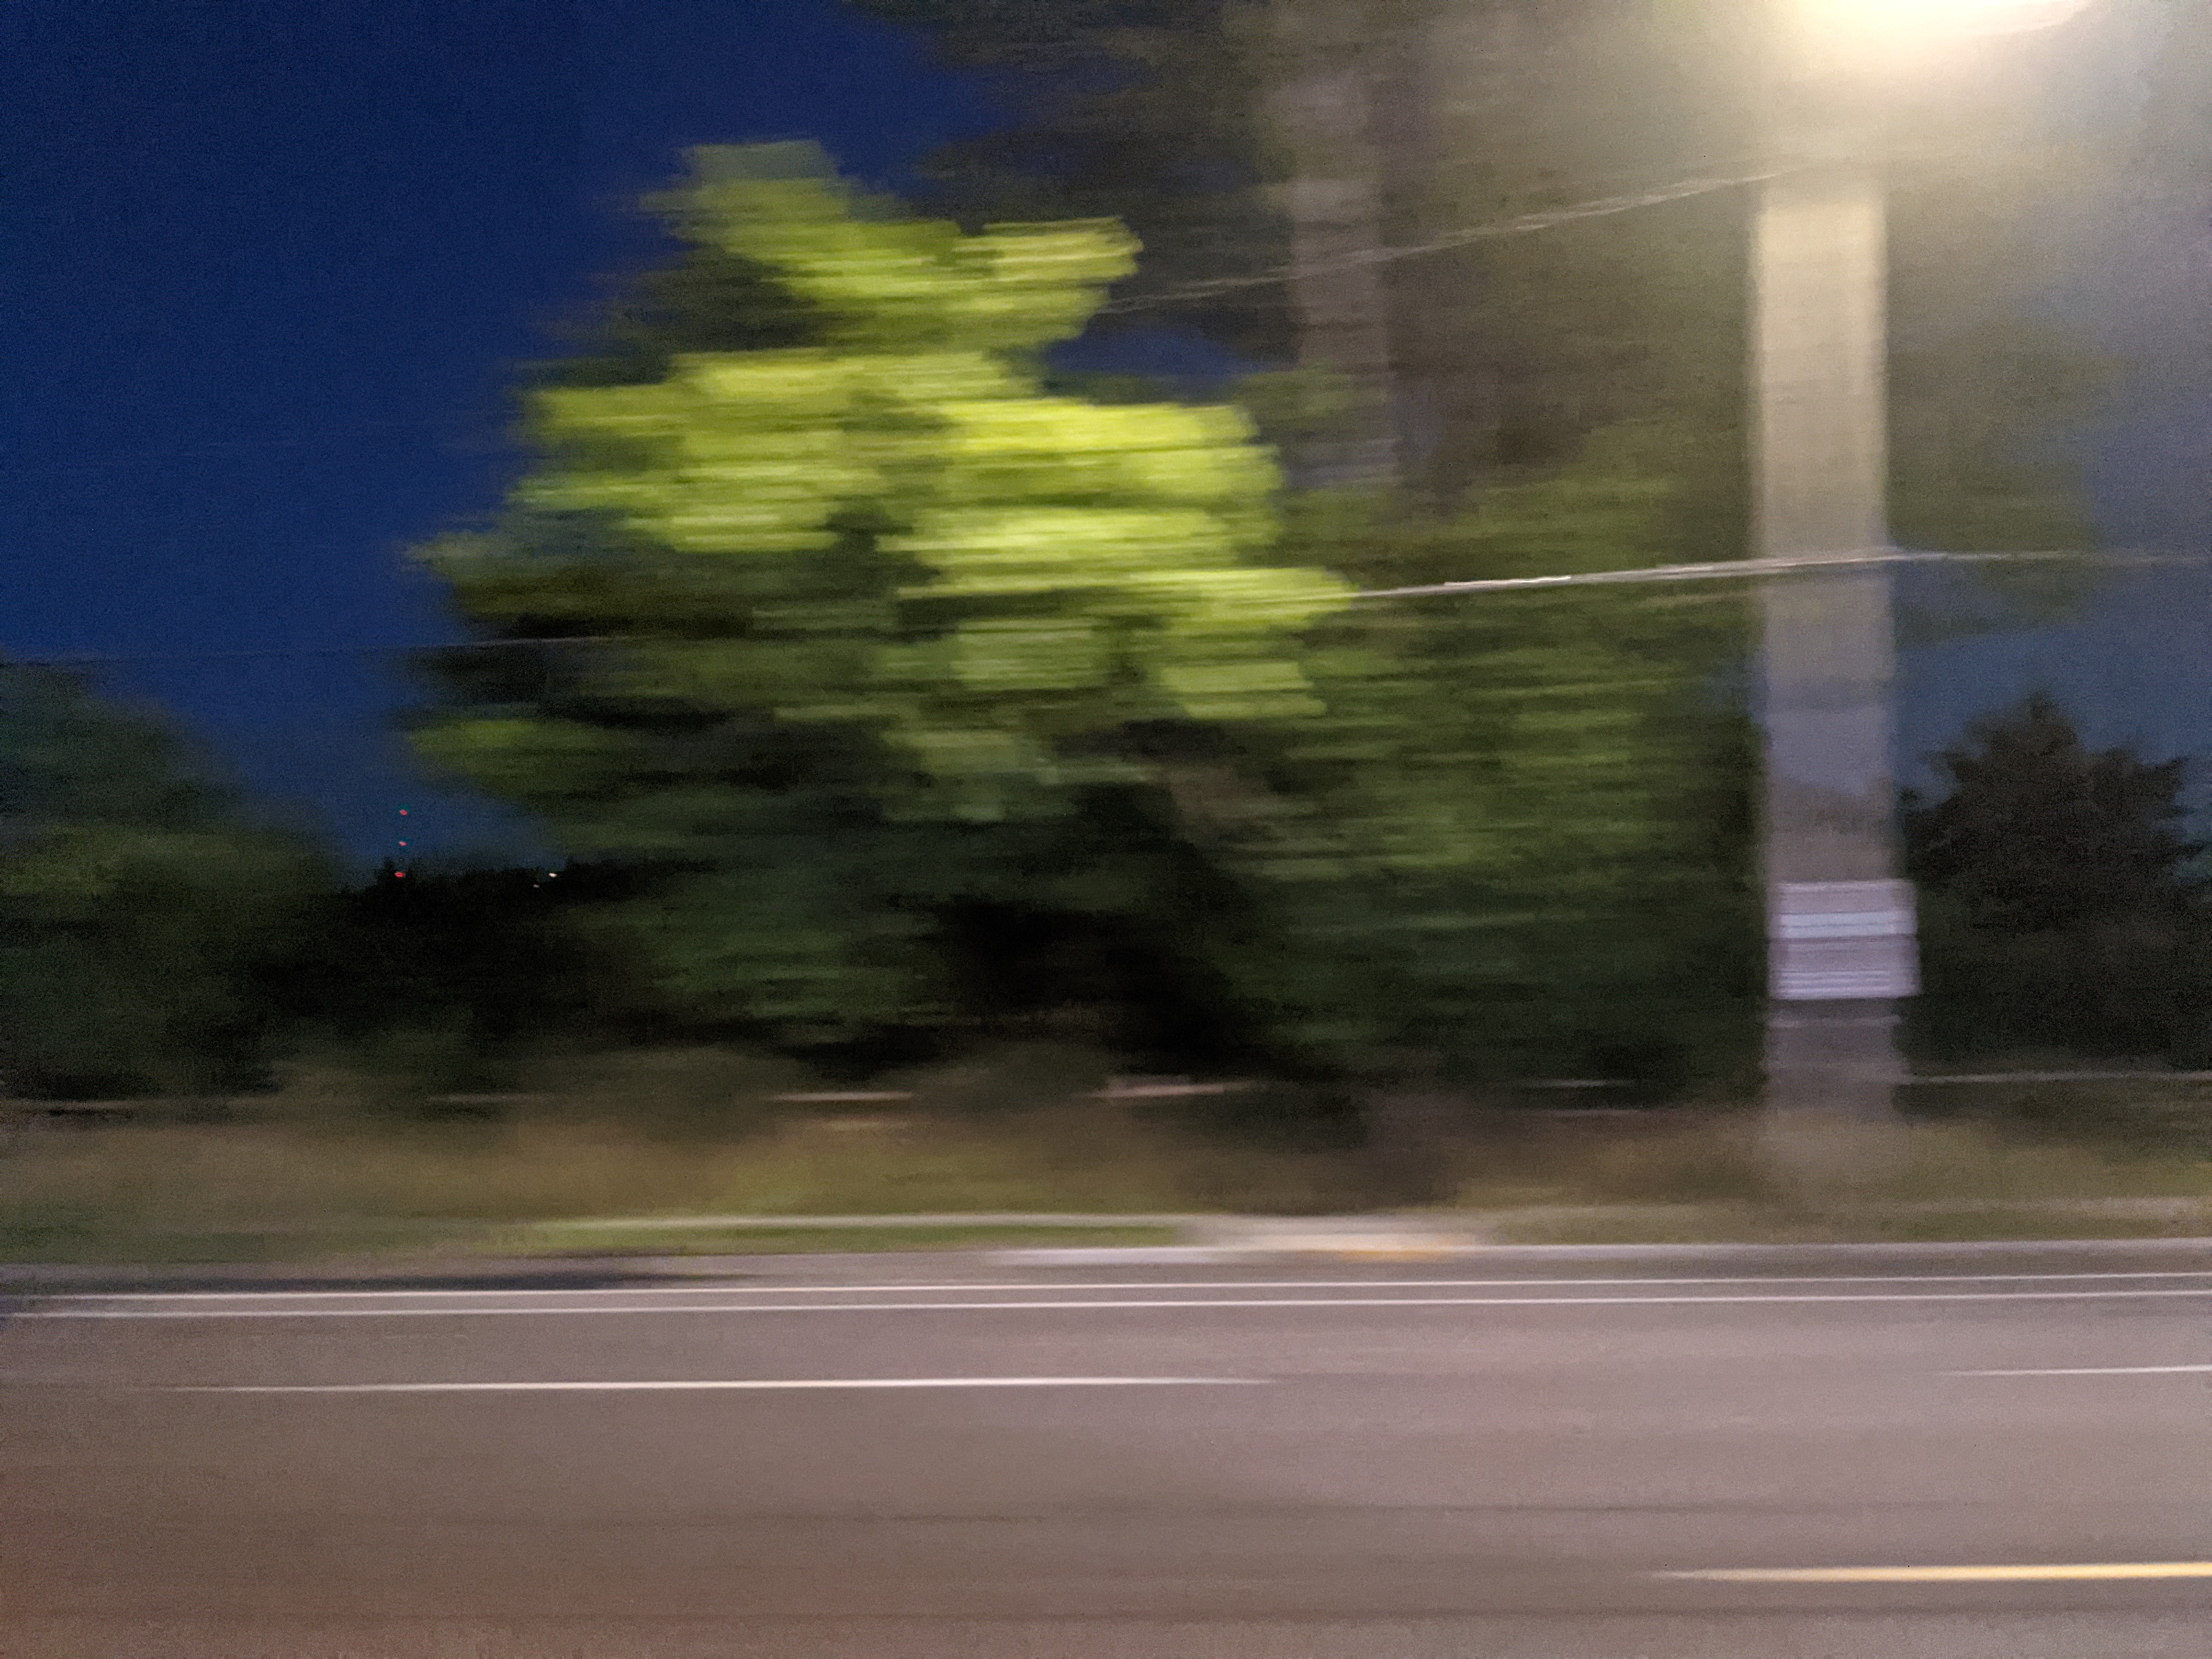 A motion blurred photo of large green roadside trees and a bright streetlamp planted amung tall wild grass, under the clear evening sky.